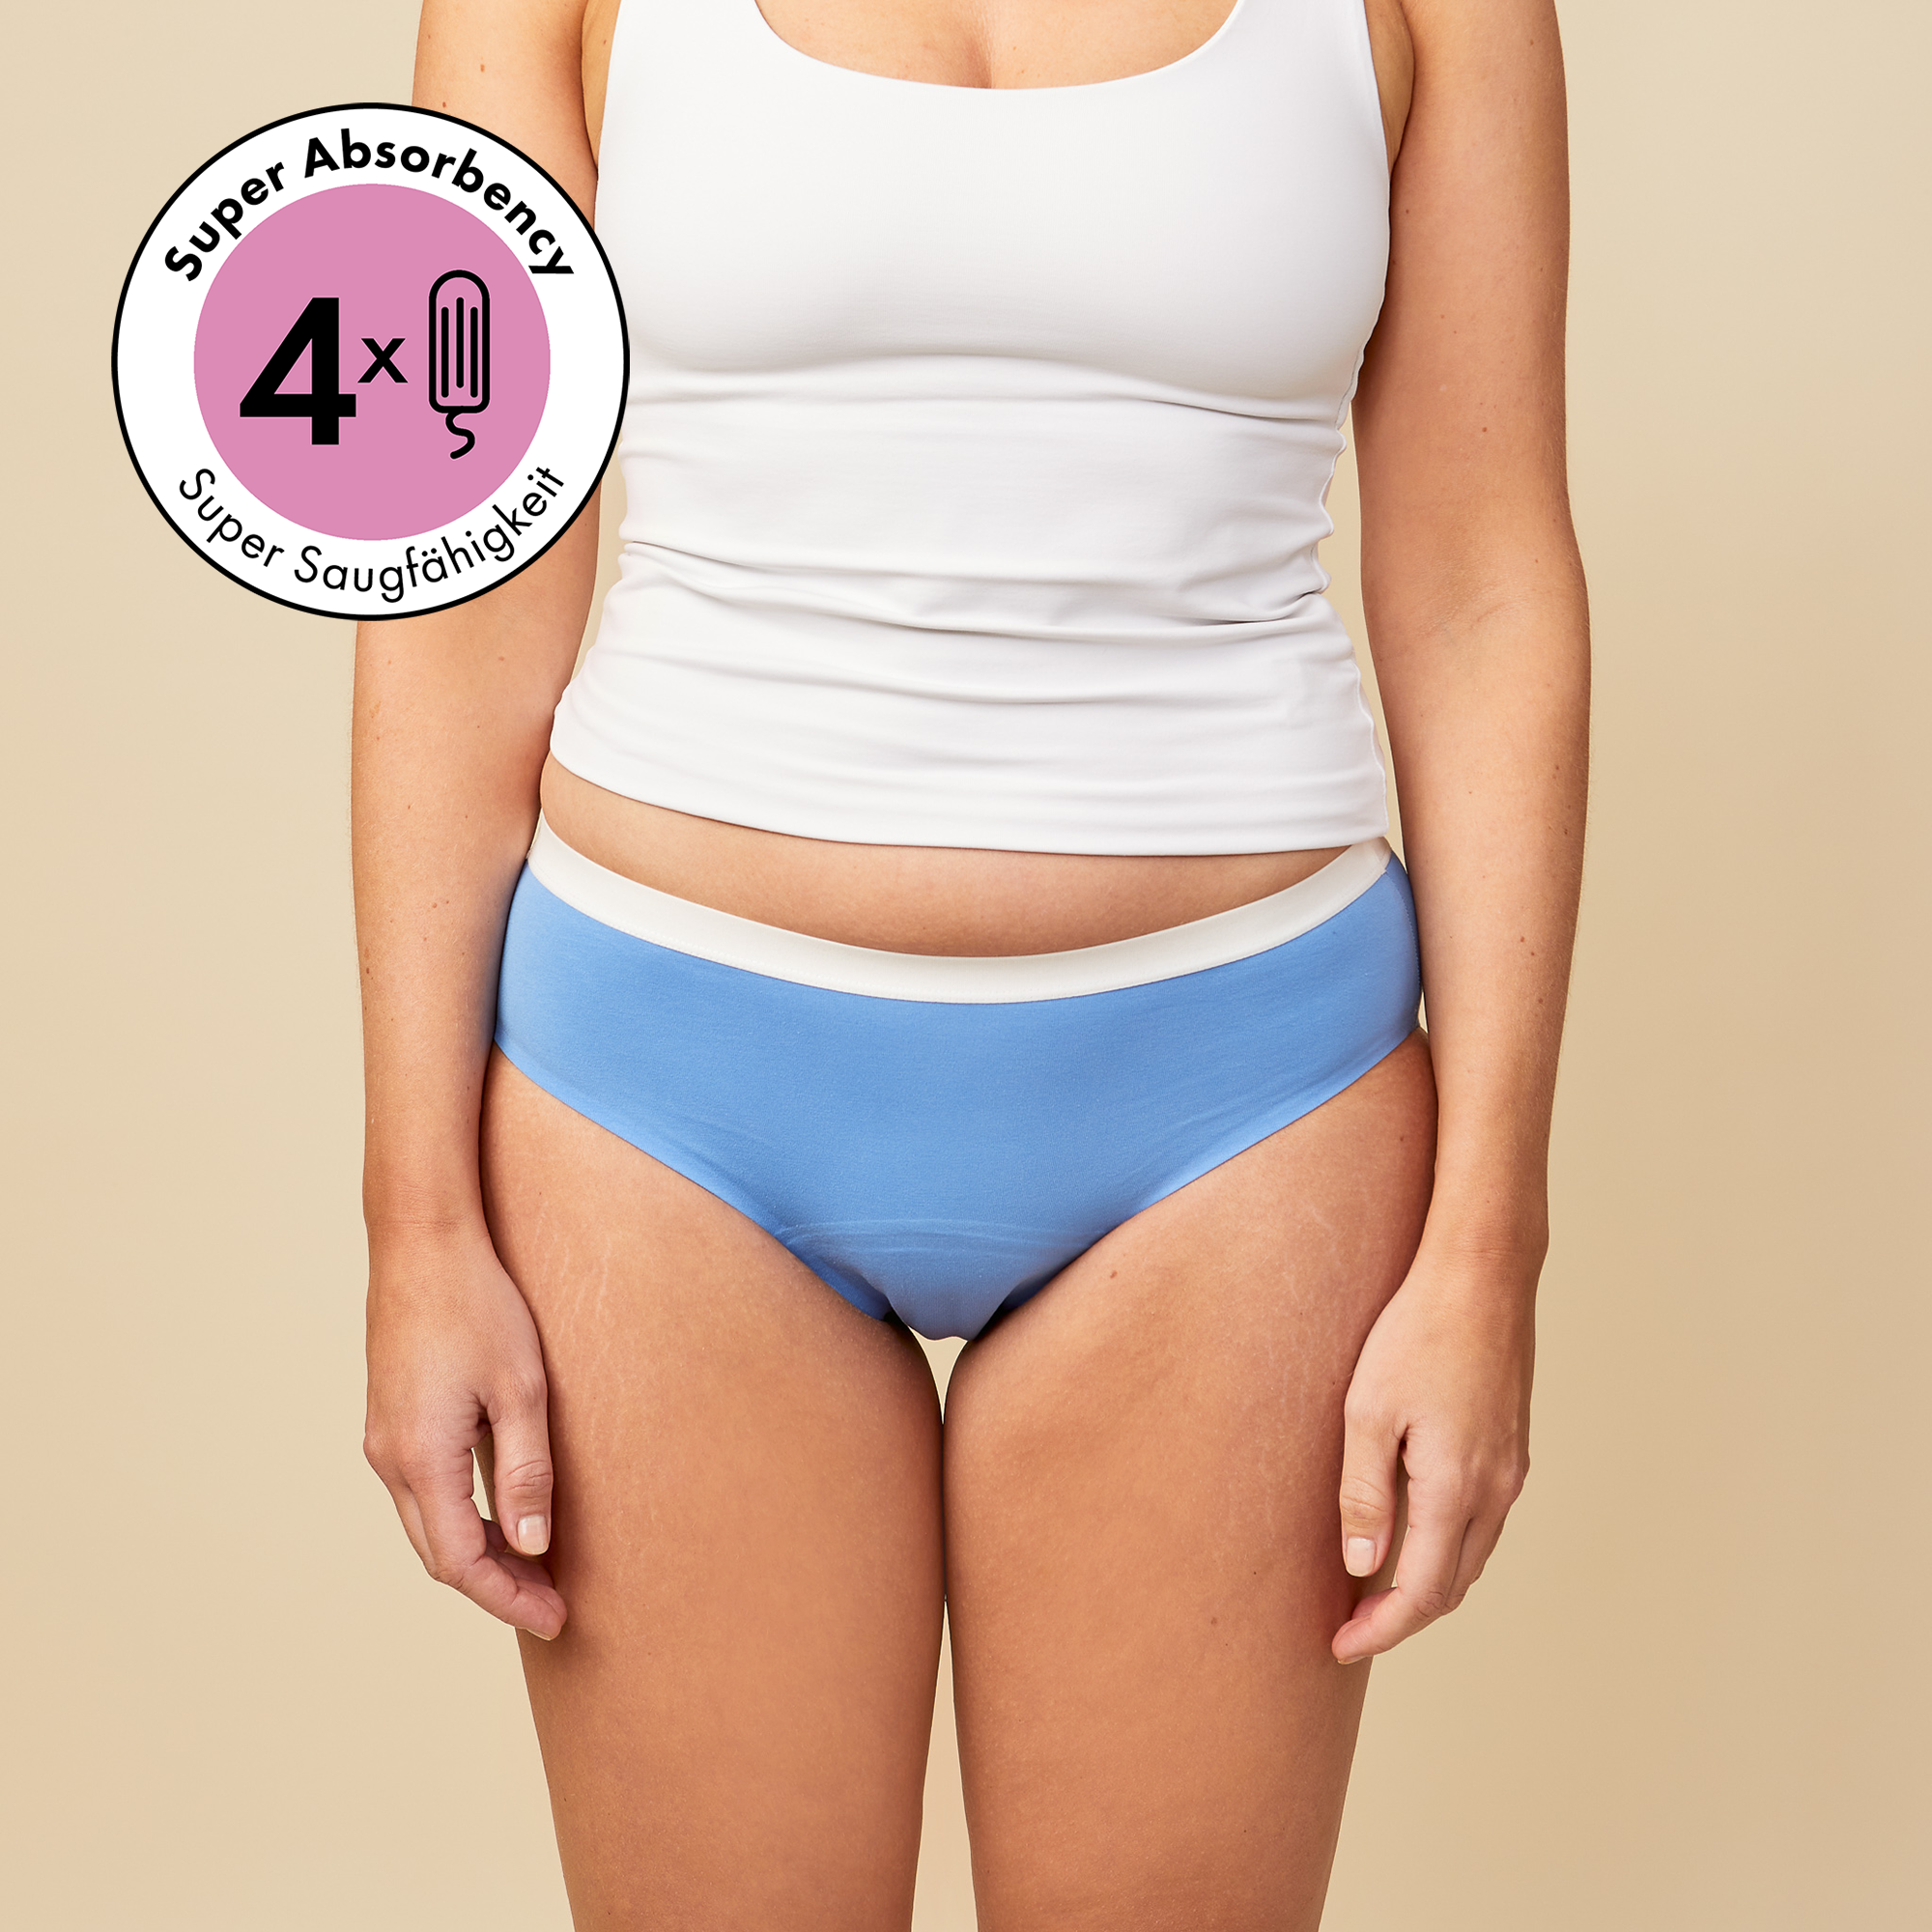 dais Period Underwear in hipster cut, blue colour with a white trim made of cotton. Designed for teenagers and super absorbent up to 4 tampons with of blood.